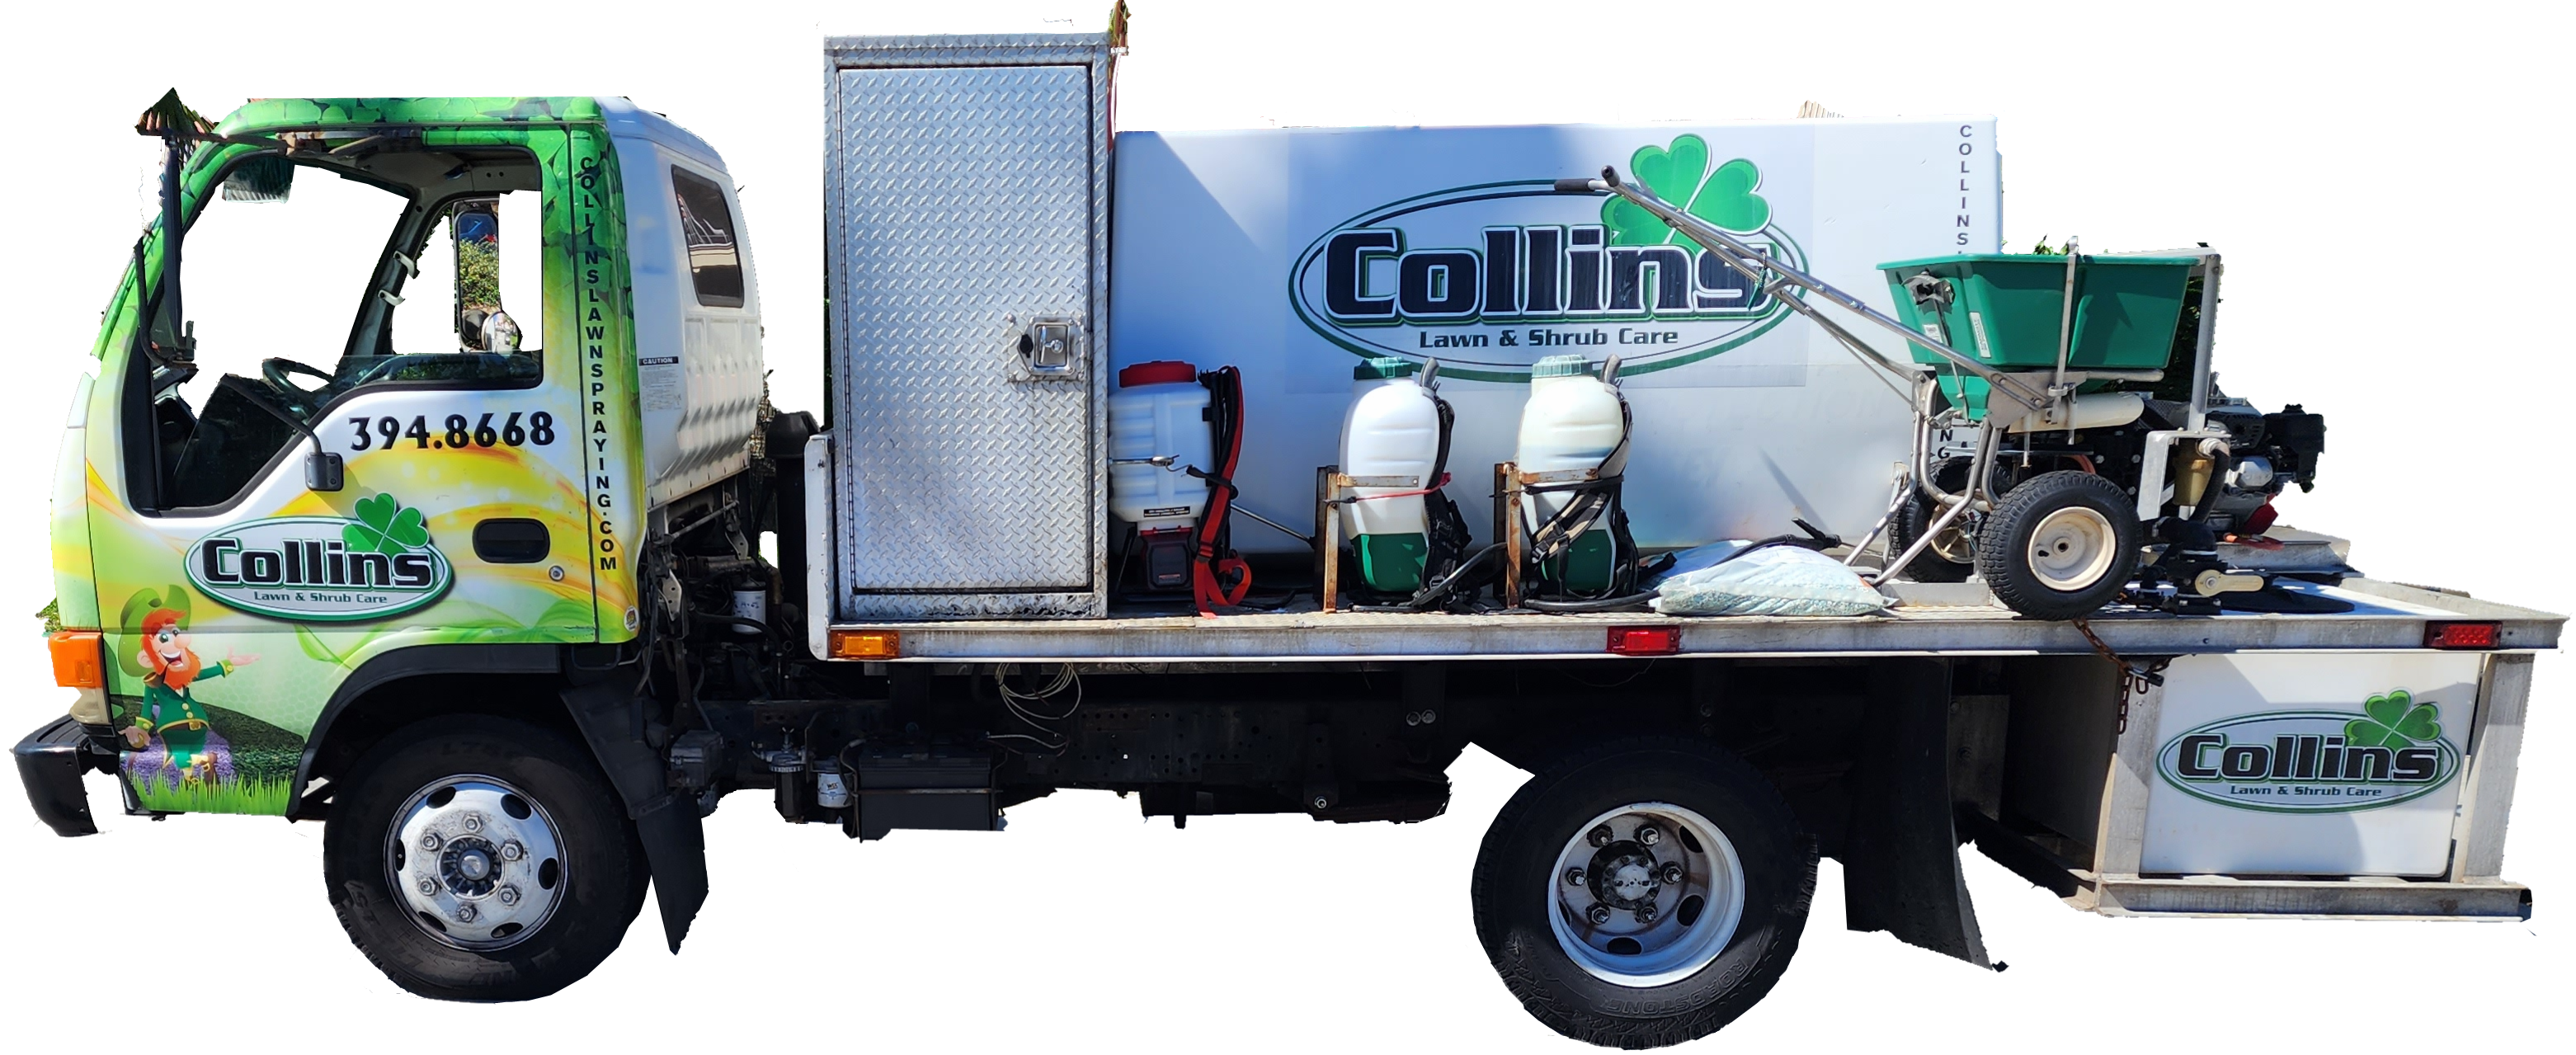 collins lawn care and tree care service truck